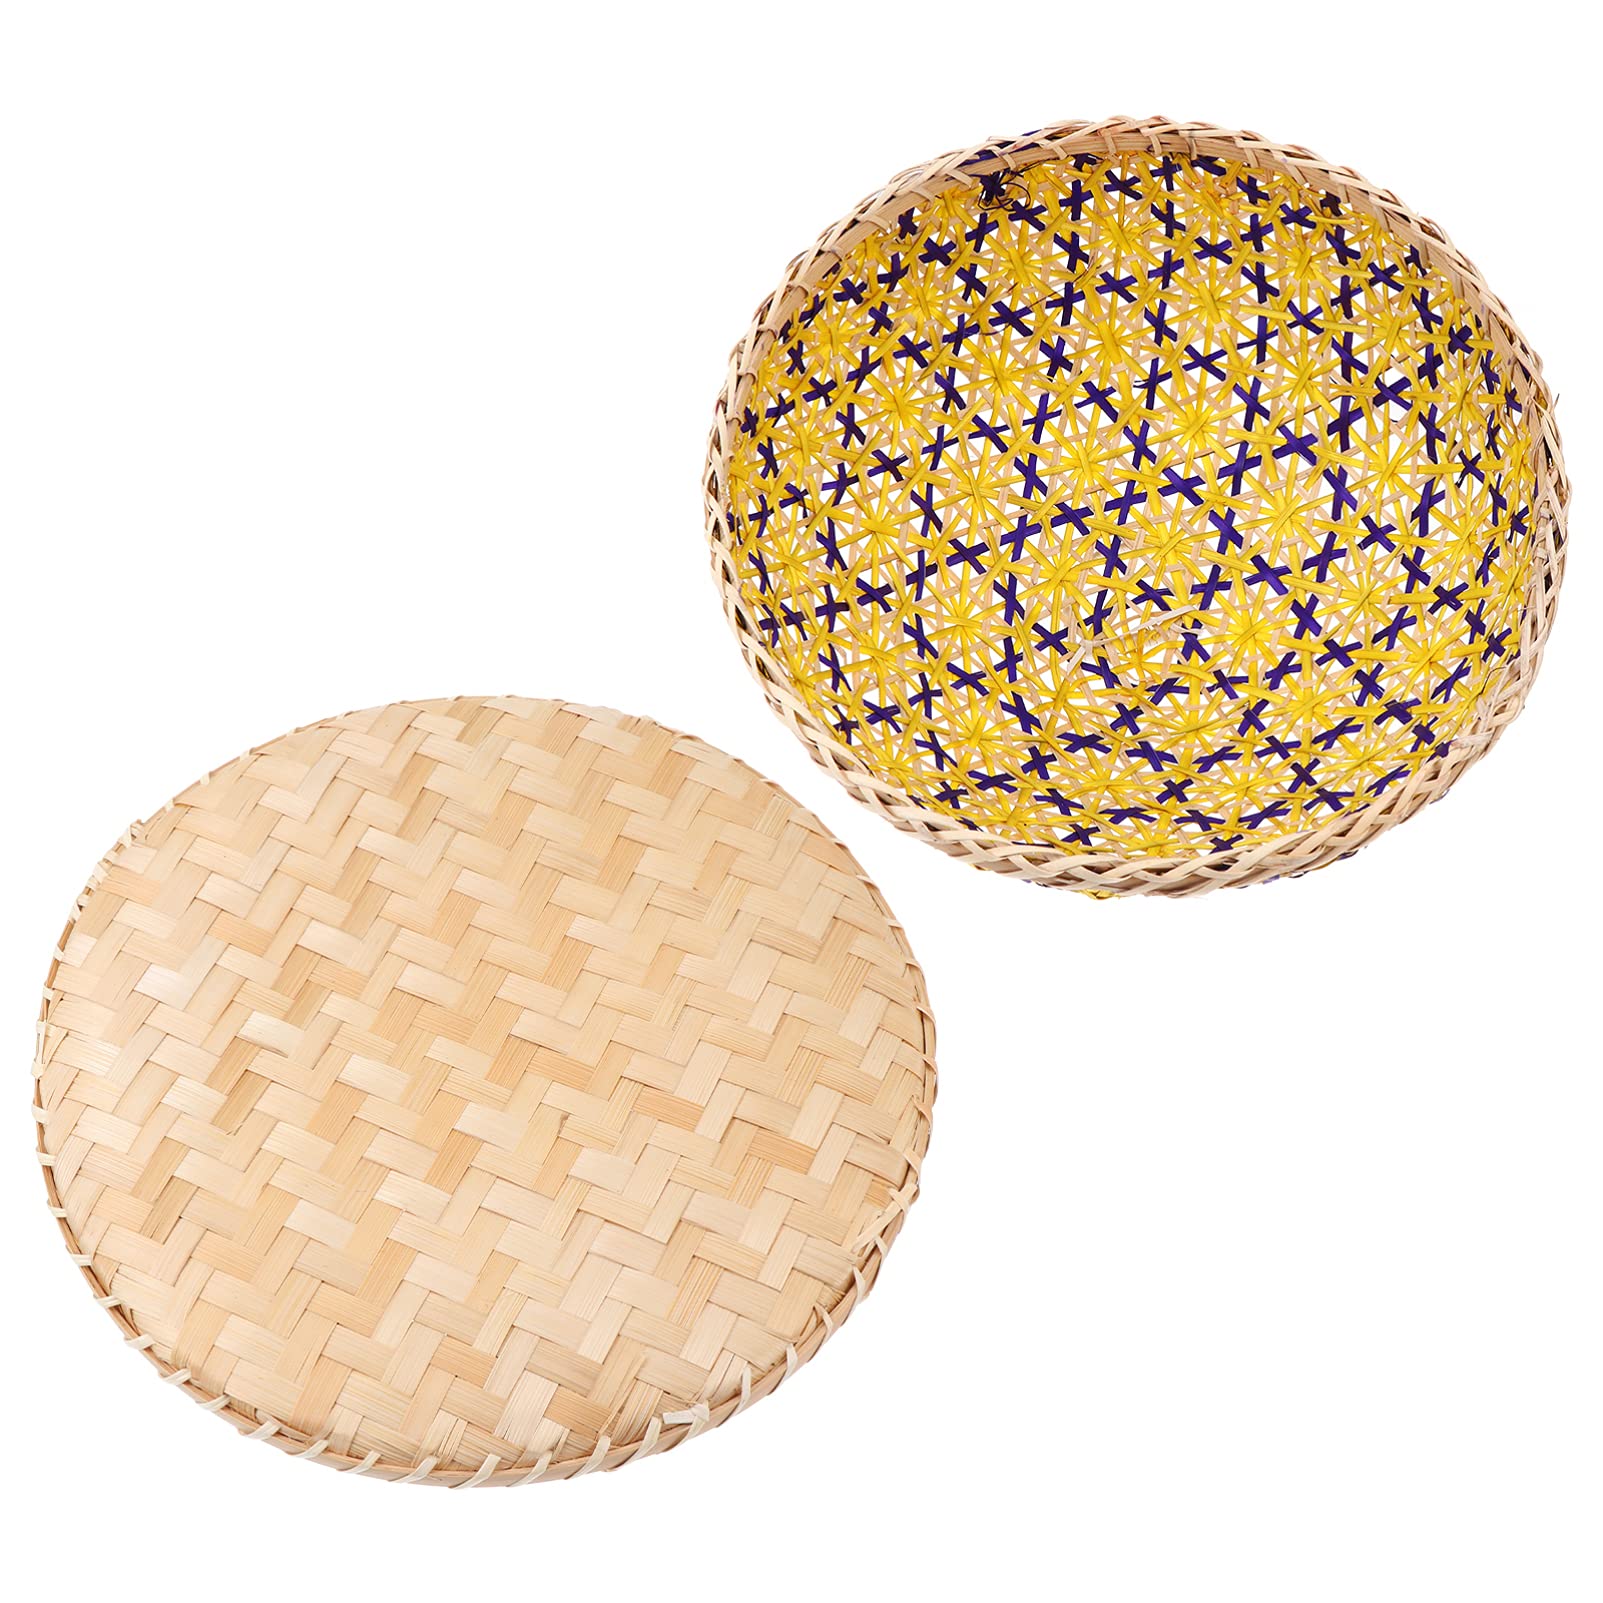 generic Hand- Woven Round Rattan Serving Tray with Food Dome Lid Cover for Picnic Party Bread Cake Pizza Dry Fruit Dessert Yellow Q1519432BAA 28x28cm